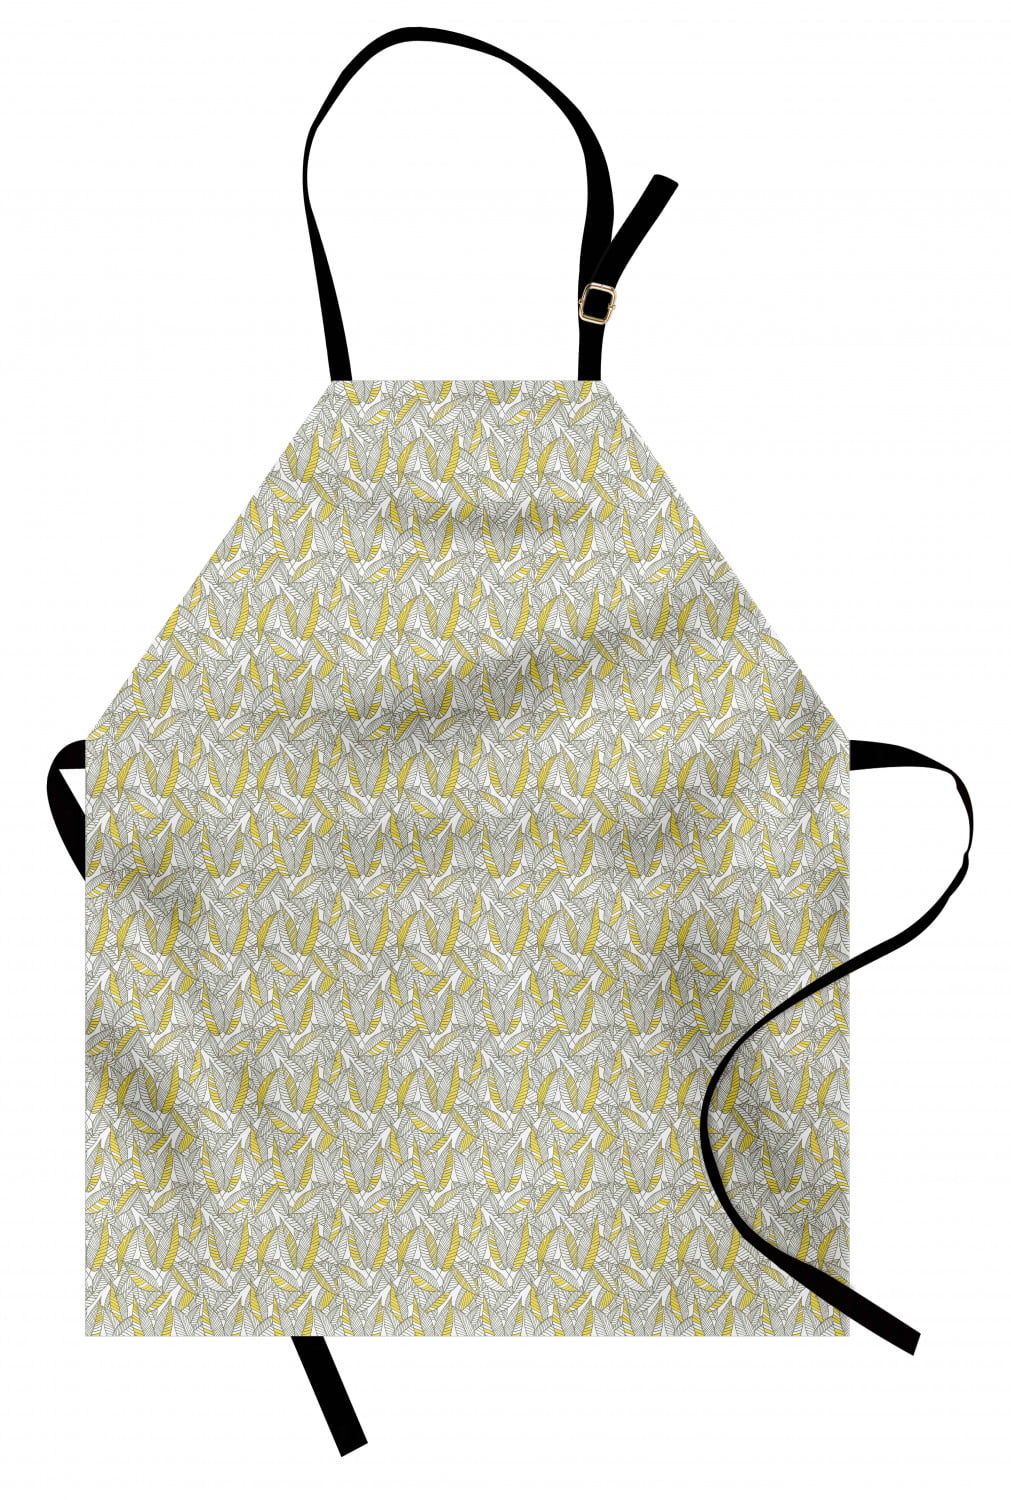 Details about   Ambesonne Apron with Adjustable Strap for Garden Cooking Unisex Clear Image 